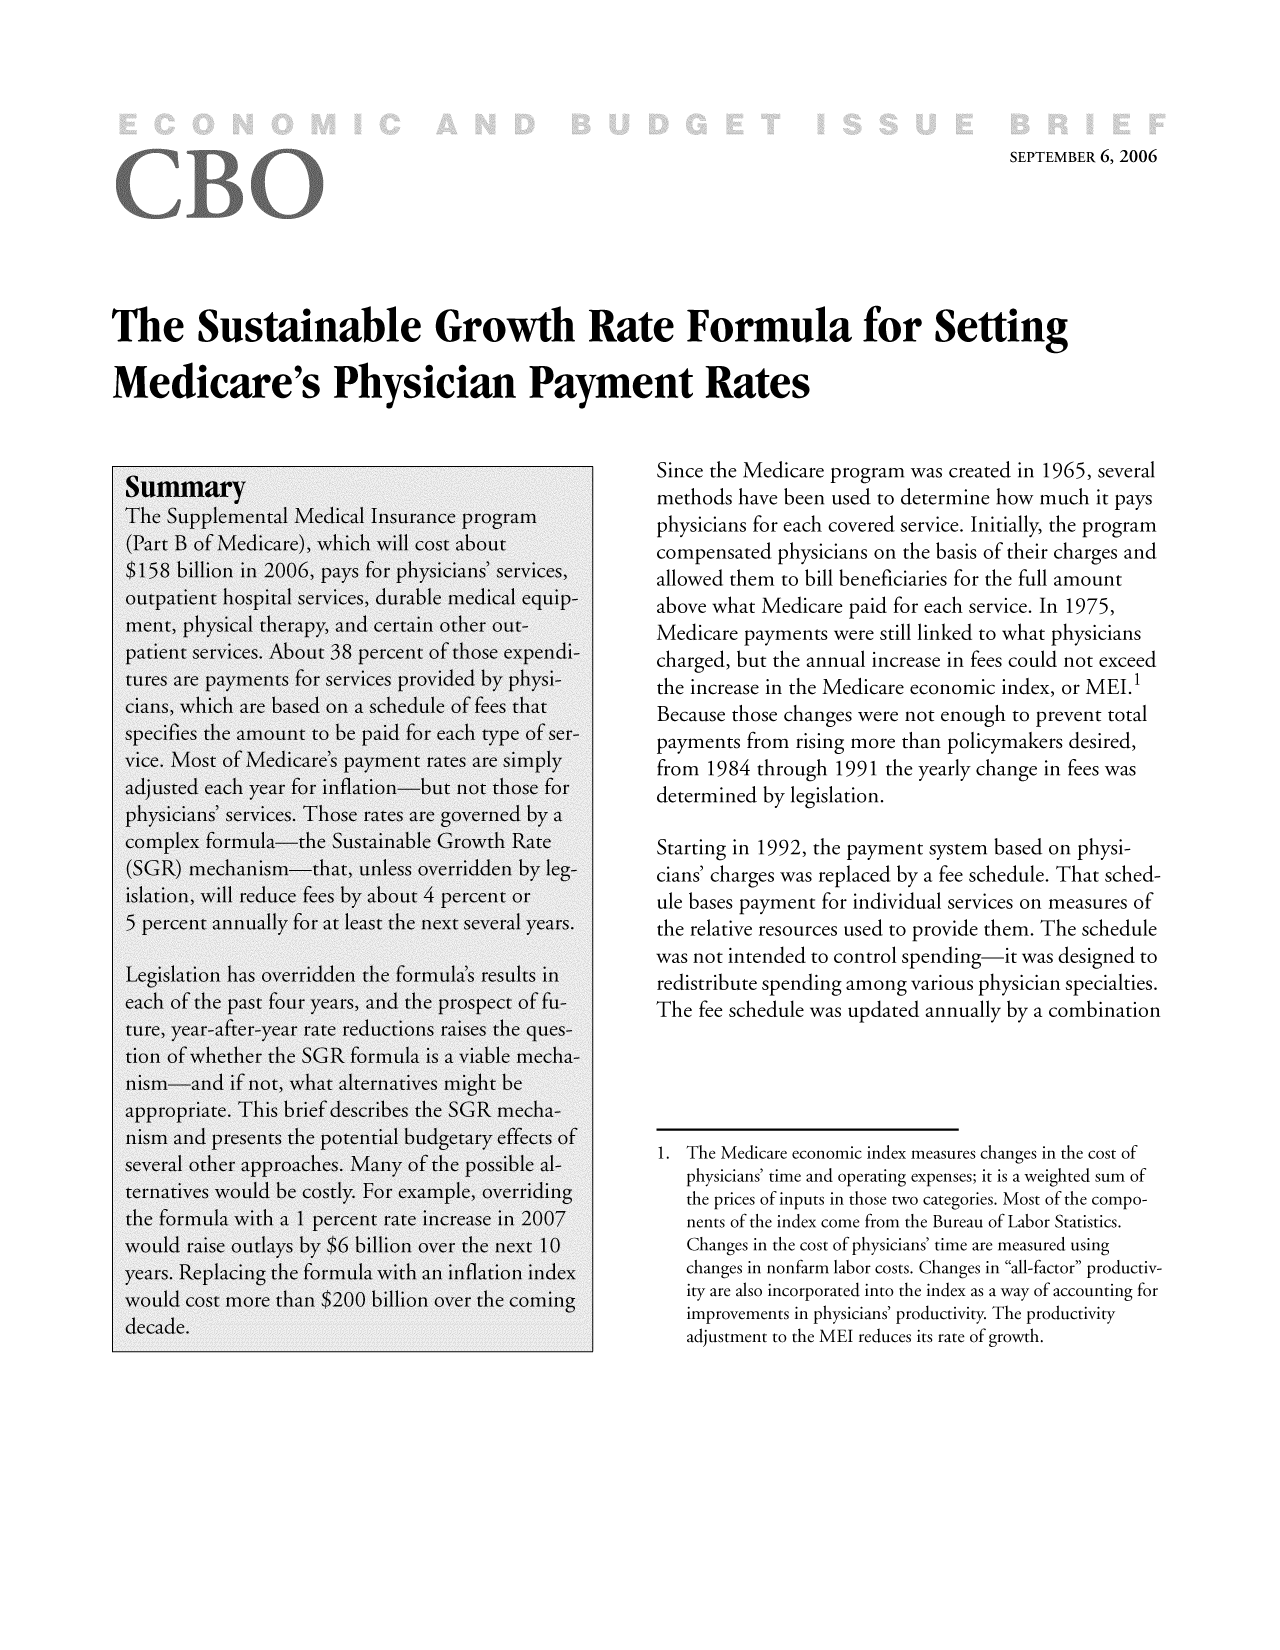 handle is hein.congrec/cbo9290 and id is 1 raw text is: SEPTEMBER 6, 2006

The Sustainable Growth Rate Formula for Setting
Medicare's Physician Payment Rates
SummarySince the Medicare program was created in 1965, several
TheSumm                                               methods have been used to determine how much it pays
(Part B of Mednareich will cost about              physicians for each covered service. Initially, the program
$158 billion in 2006, pays for physicians' services,  compensated physicians on the basis of their charges and
$158bilion n 206, aysforphyscias' srviesallowed them to bill beneficiaries for the full amount
outpatient hospital services, durable medical equip-  above what Medicare paid for each service. In 1975,
ment, physical therapy, and certain other out-        Medicare payments were still linked to what physicians
patient services. About 38 percent of those expendi-  charged, but the annual increase in fees could not exceed
tures are payments for services provided by physi-    the increase in the Medicare economic index, or MEL
cians, which are based on a schedule of fees that     Because those changes were not enough to prevent total
specifies the amount to be paid for each type of ser-  payments from rising more than policymakers desired,
vice. Most of Medicare's payment rates are simply     from 1984 through 1991 the yearly change in fees was
adjusted each year for inflation-but not those for    determined by legislation.
physicians' services. Those rates are governed by a
complex formula-the Sustainable Growth Rate           Starting in 1992, the payment system based on physi-
(SGR) mechanism-that, unless overridden by leg-       cians' charges was replaced by a fee schedule. That sched-
islation, will reduce fees by about 4 percent or      ule bases payment for individual services on measures of
5 percent annually for at least the next several years.  the relative resources used to provide them. The schedule
Legislation has overridden the formula's results inwas not intended to control spending  it was designed to
each of the past four years, and the prospect of fu-Te      e s ewanuated annuallysbyiancombiation
ture, year-after-year rate reductions raises the ques-
tion of whether the SGR formula is a viable mecha-
nism-and if not, what alternatives might be
appropriate. This brief describes the SGR mecha-
nism and presents the potential budgetary effects of
several other approaches. Many of the possible al-       physicians' time and operating expenses; it is a weighted sum of
ternatives would be costly. For example, overriding     the prices of inputs in those two categories. Most of the compo-
the formula with a 1 percent rate increase in 2007       nents of the index come from the Bureau of Labor Statistics.
would raise outlays by $6 billion over the next 10       Changes in the cost of physicians' time are measured using
years. Replacing the formula with an inflation index     changes in nonfarm labor costs. Changes in all-factor productiv-
would cost more than $200 billion over the coming        ity are also incorporated into the index as a way of accounting for
decade.                                                 improvements in physicians' productivity. The productivity
adjustment to the ME reduces its rate of growth.


